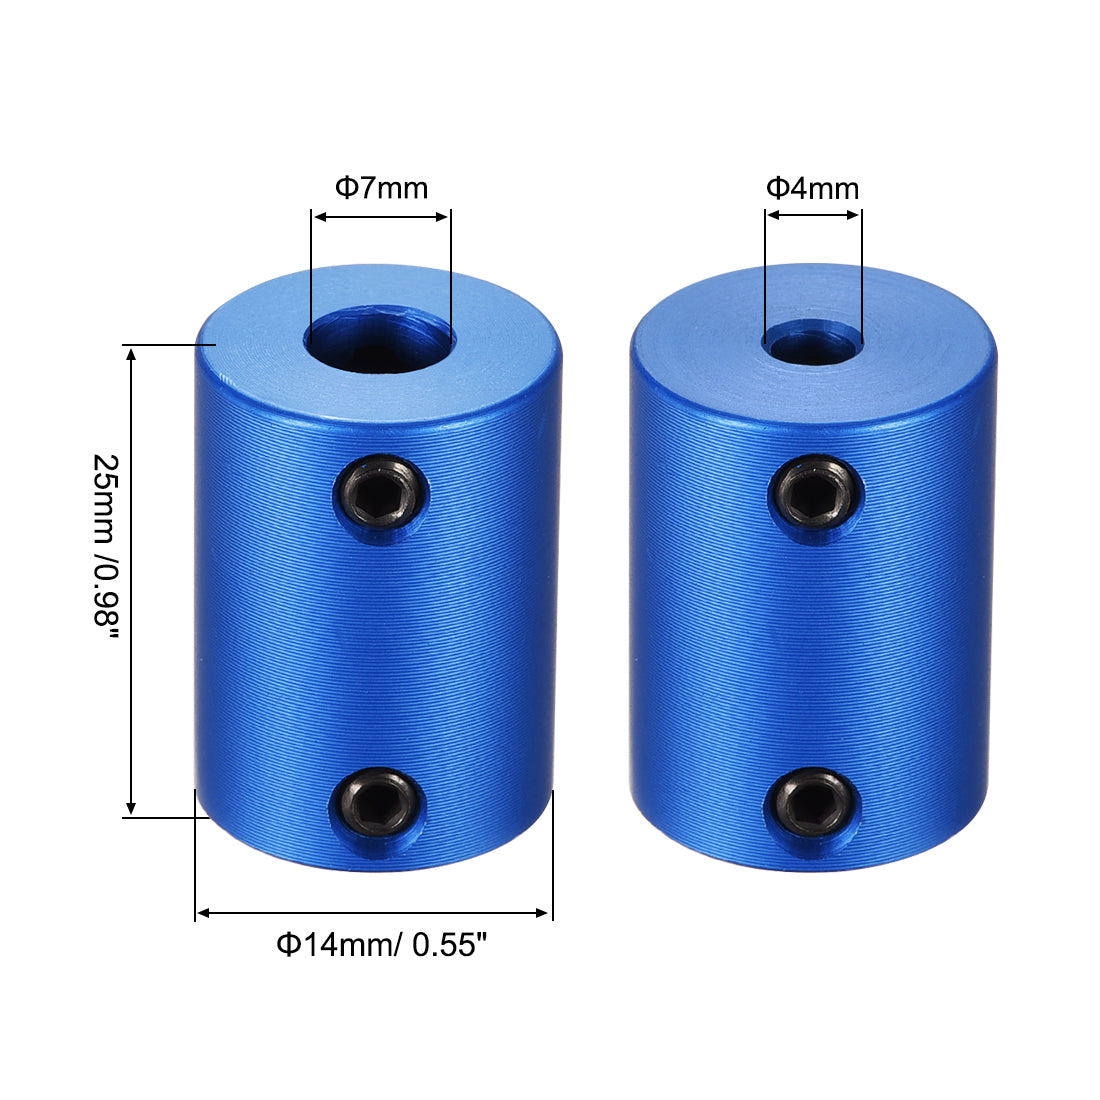 Uxcell Uxcell 8mm to 10mm Bore Rigid Coupling 25mm Length 18mm Diameter Aluminum Alloy Shaft Coupler Connector Blue